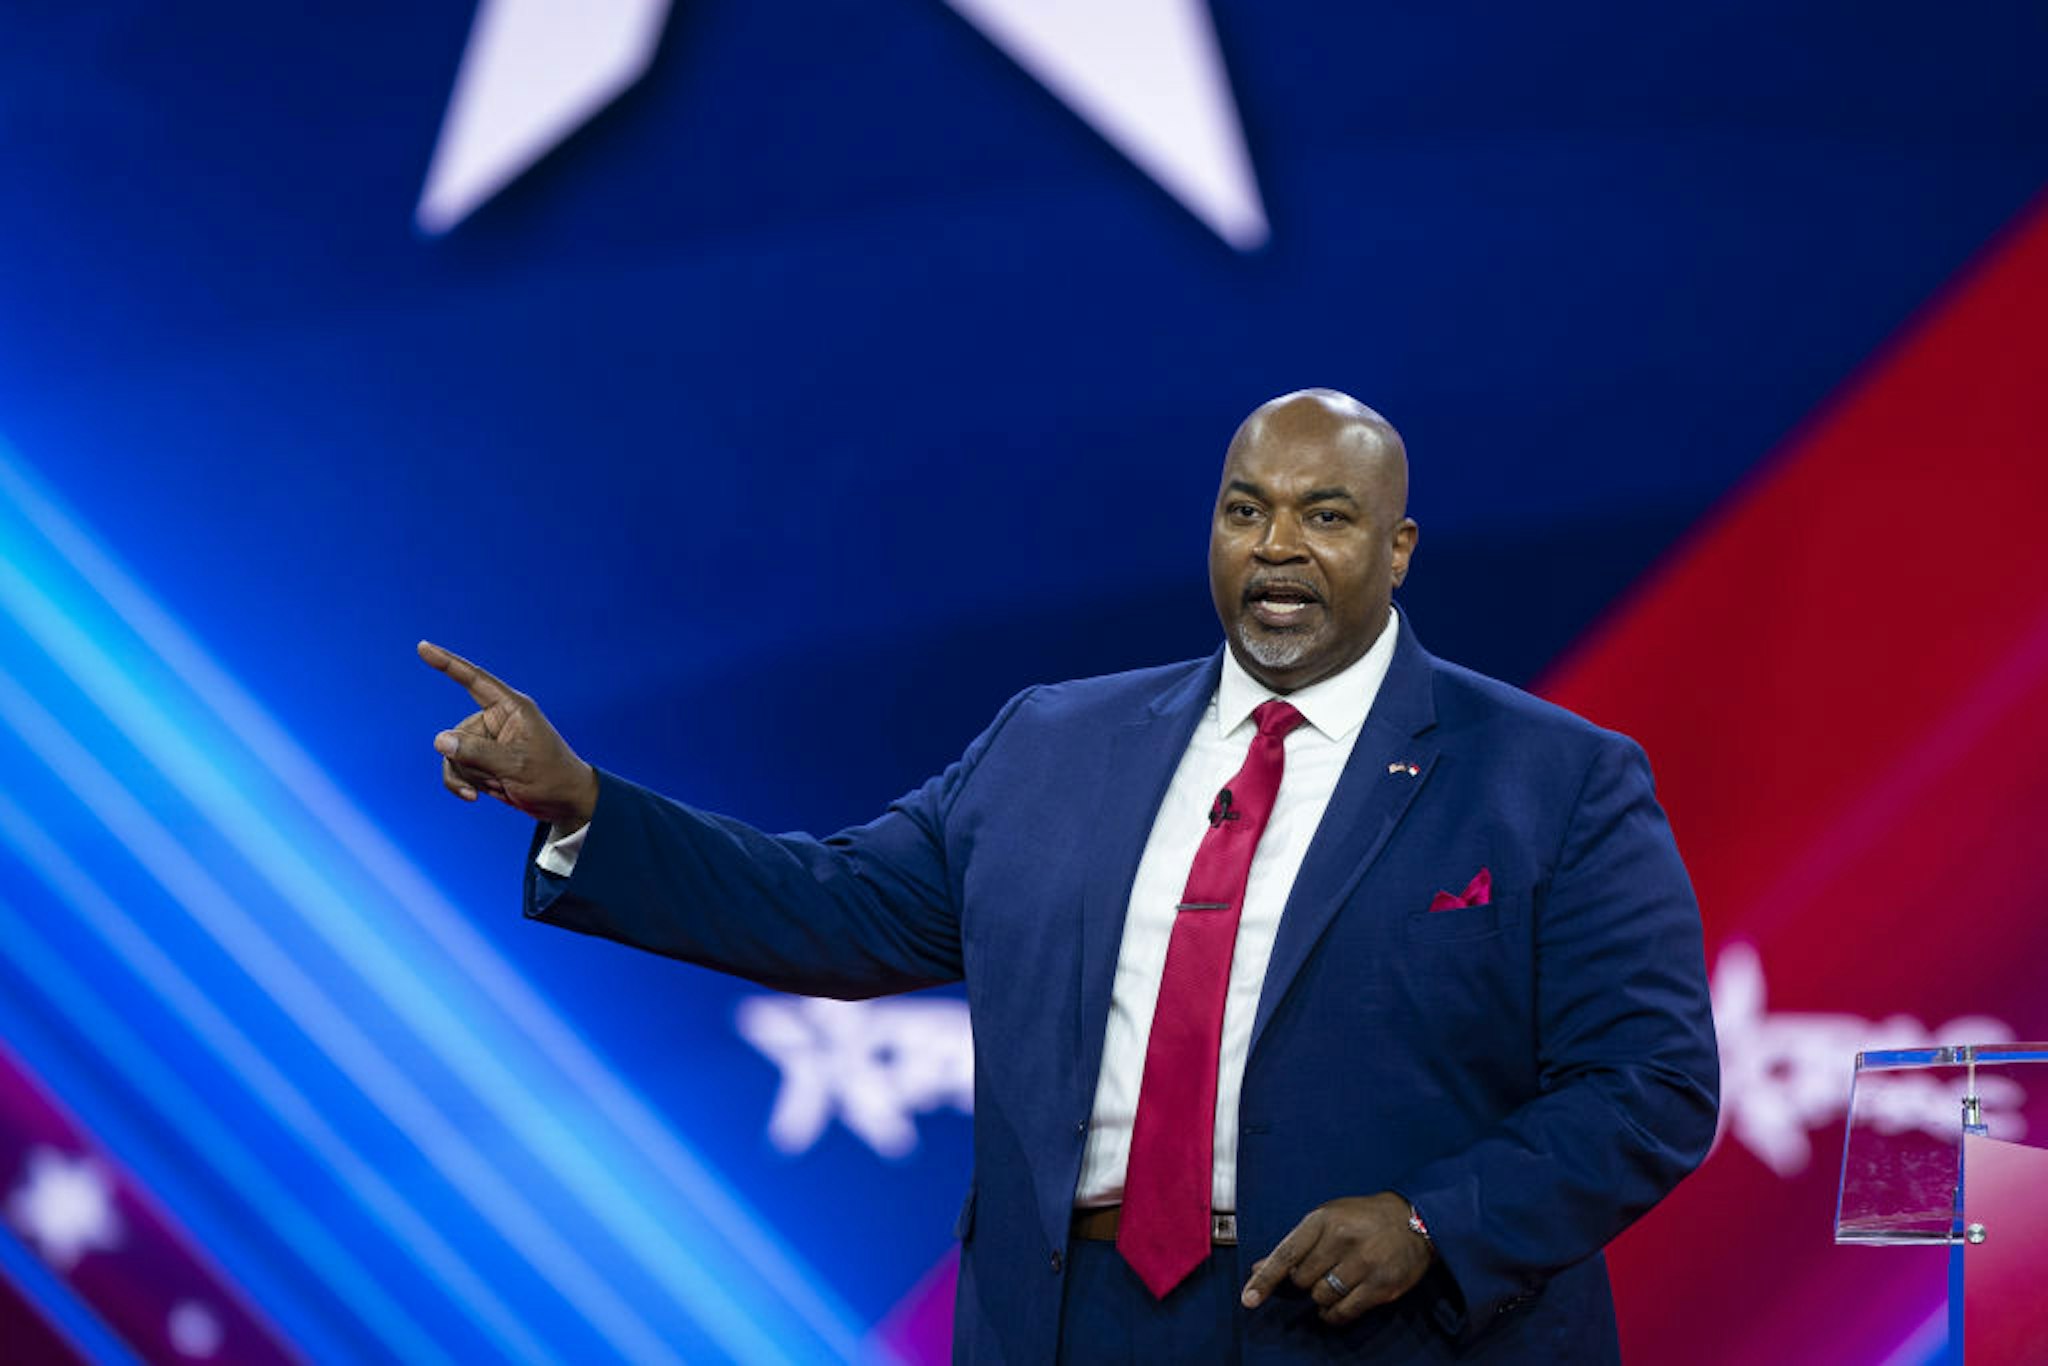 Mark Robinson, lieutenant governor of North Carolina, speaks during the Conservative Political Action Conference (CPAC) in National Harbor, Maryland, US, on Saturday, March 4, 2023. The Conservative Political Action Conference launched in 1974 brings together conservative organizations, elected leaders, and activists.